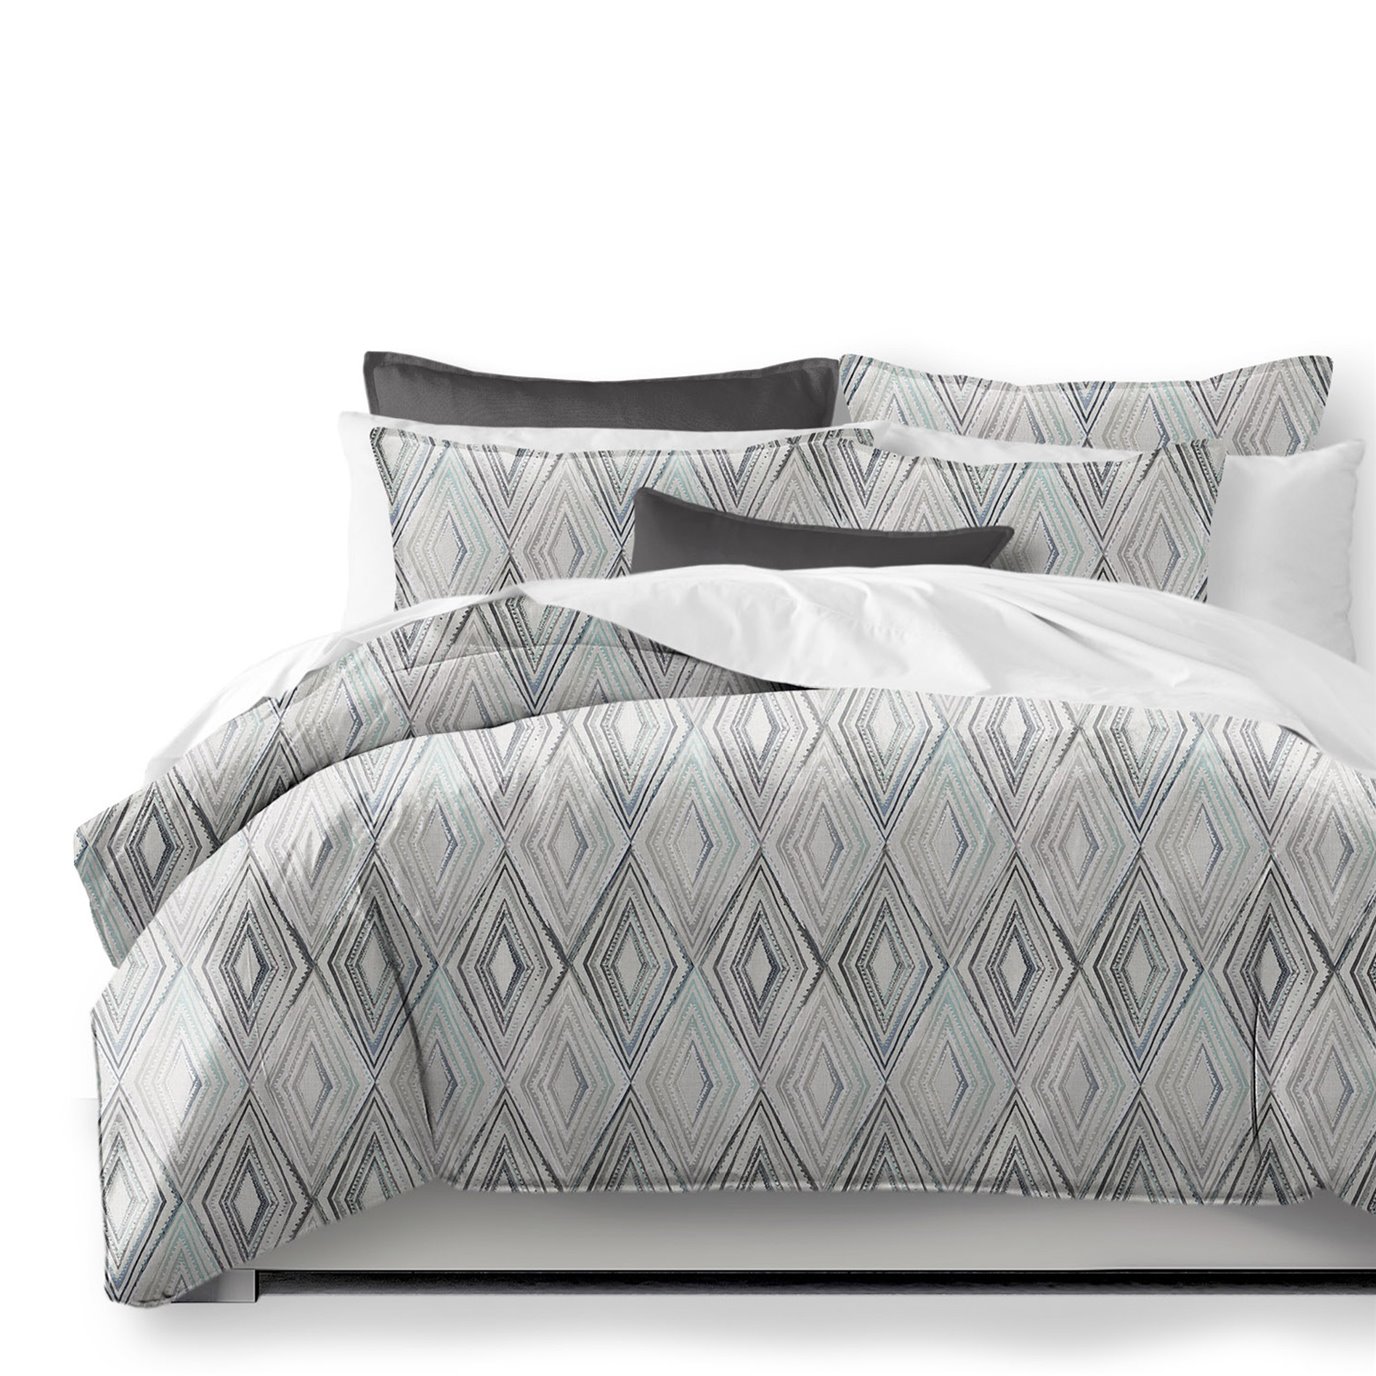 Sloane Seabreeze/Ivory Duvet Cover and Pillow Sham(s) Set - Size Twin